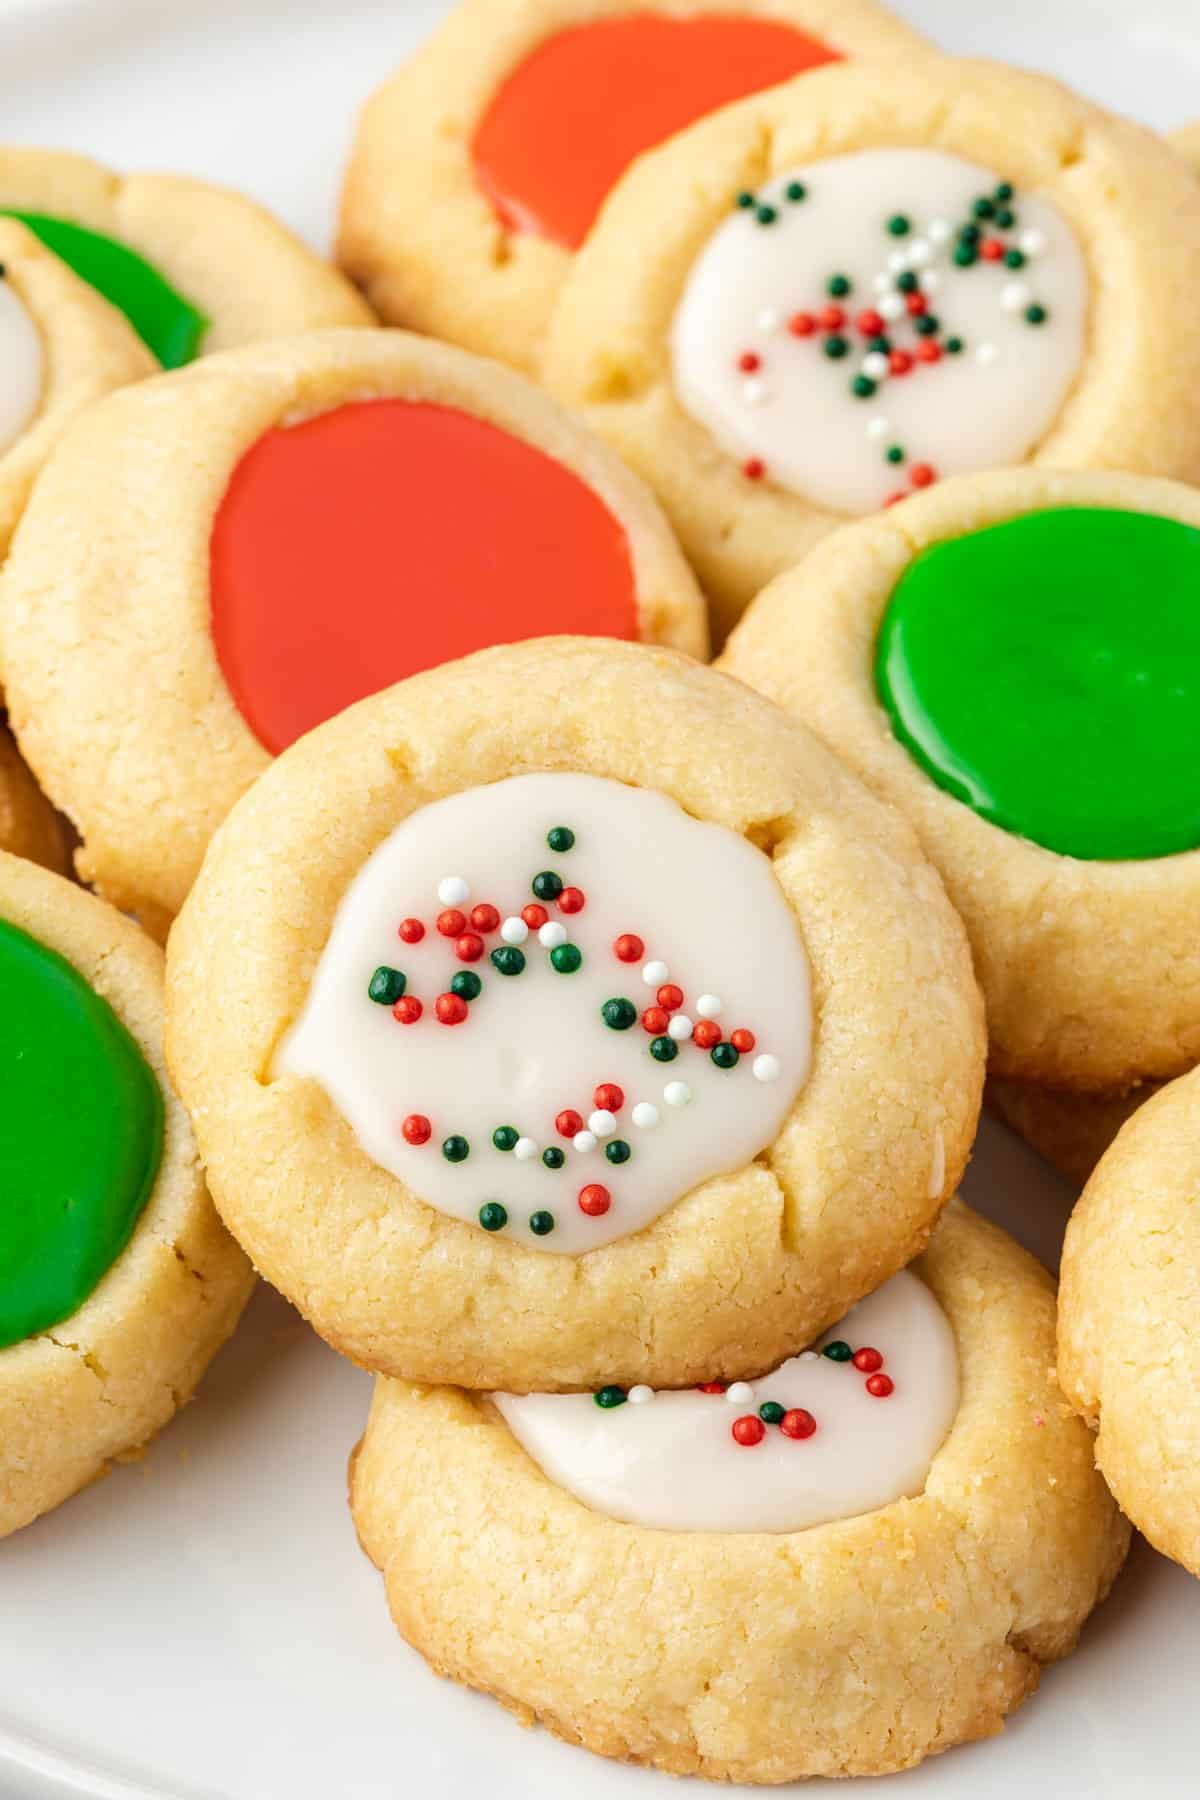 Stack of assorted (red, green, white with sprinkles) iced thumbprint cookies on a plate,